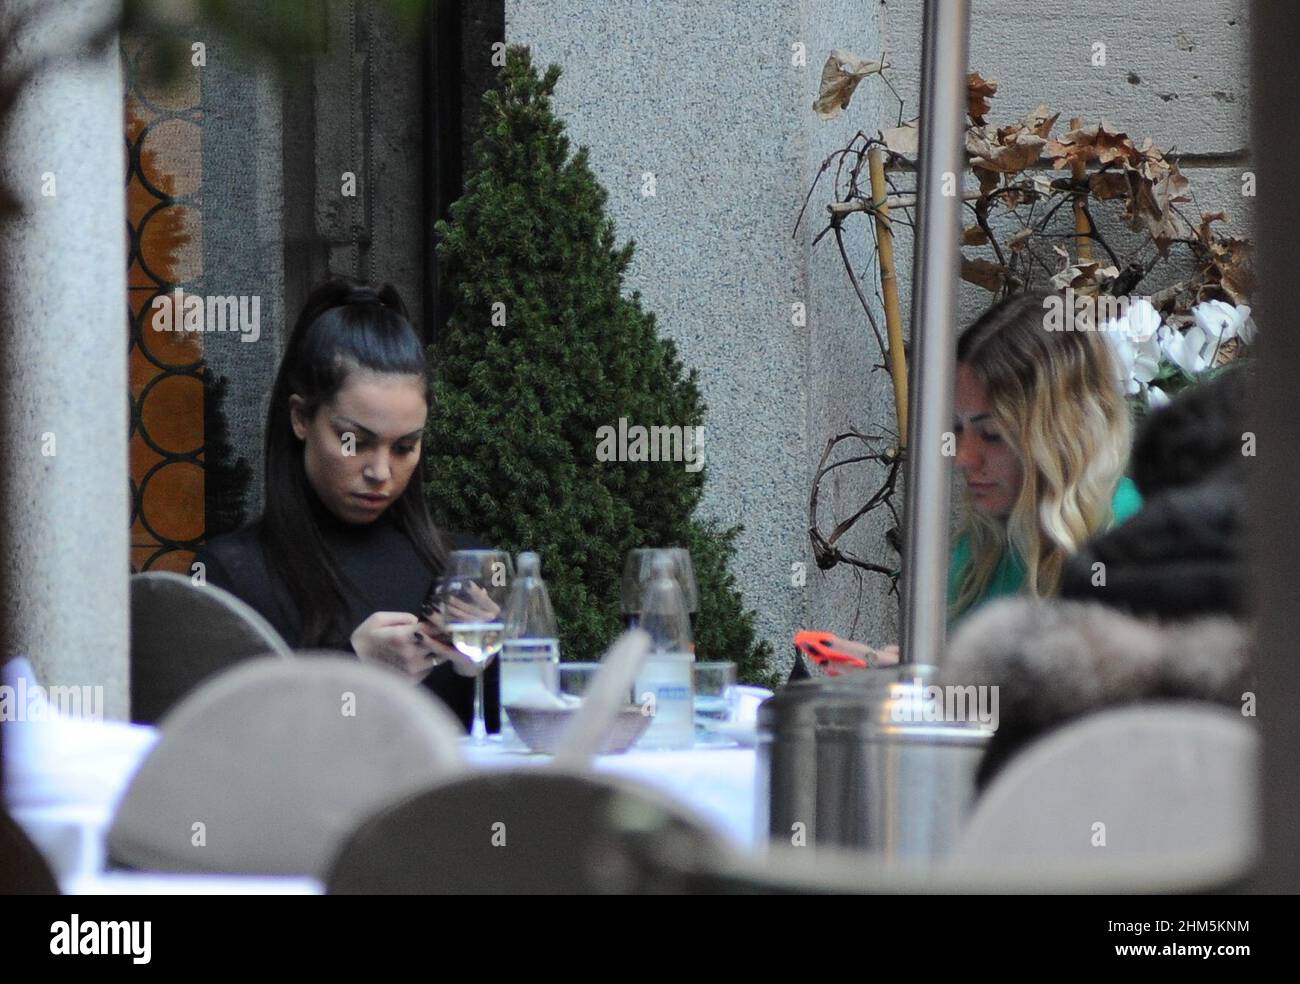 Milan, . 07th Feb, 2022. Milan, 07-02-2022 Karima El Mahroug, better known as RUBY RUBACUORI main protagonist of the 'BUNGA BUNGA' trial against SILVIO BERLUSCONI, after being surprised at lunch with a friend in a famous restaurant in the center, enters a clothing boutiques to buy some shirts, including one with a red heart to celebrate 'Valentine's Day'. At the end of the shopping, she lets her friend take her home by car. EXCLUSIVE SERVICE Credit: Independent Photo Agency/Alamy Live News Stock Photo